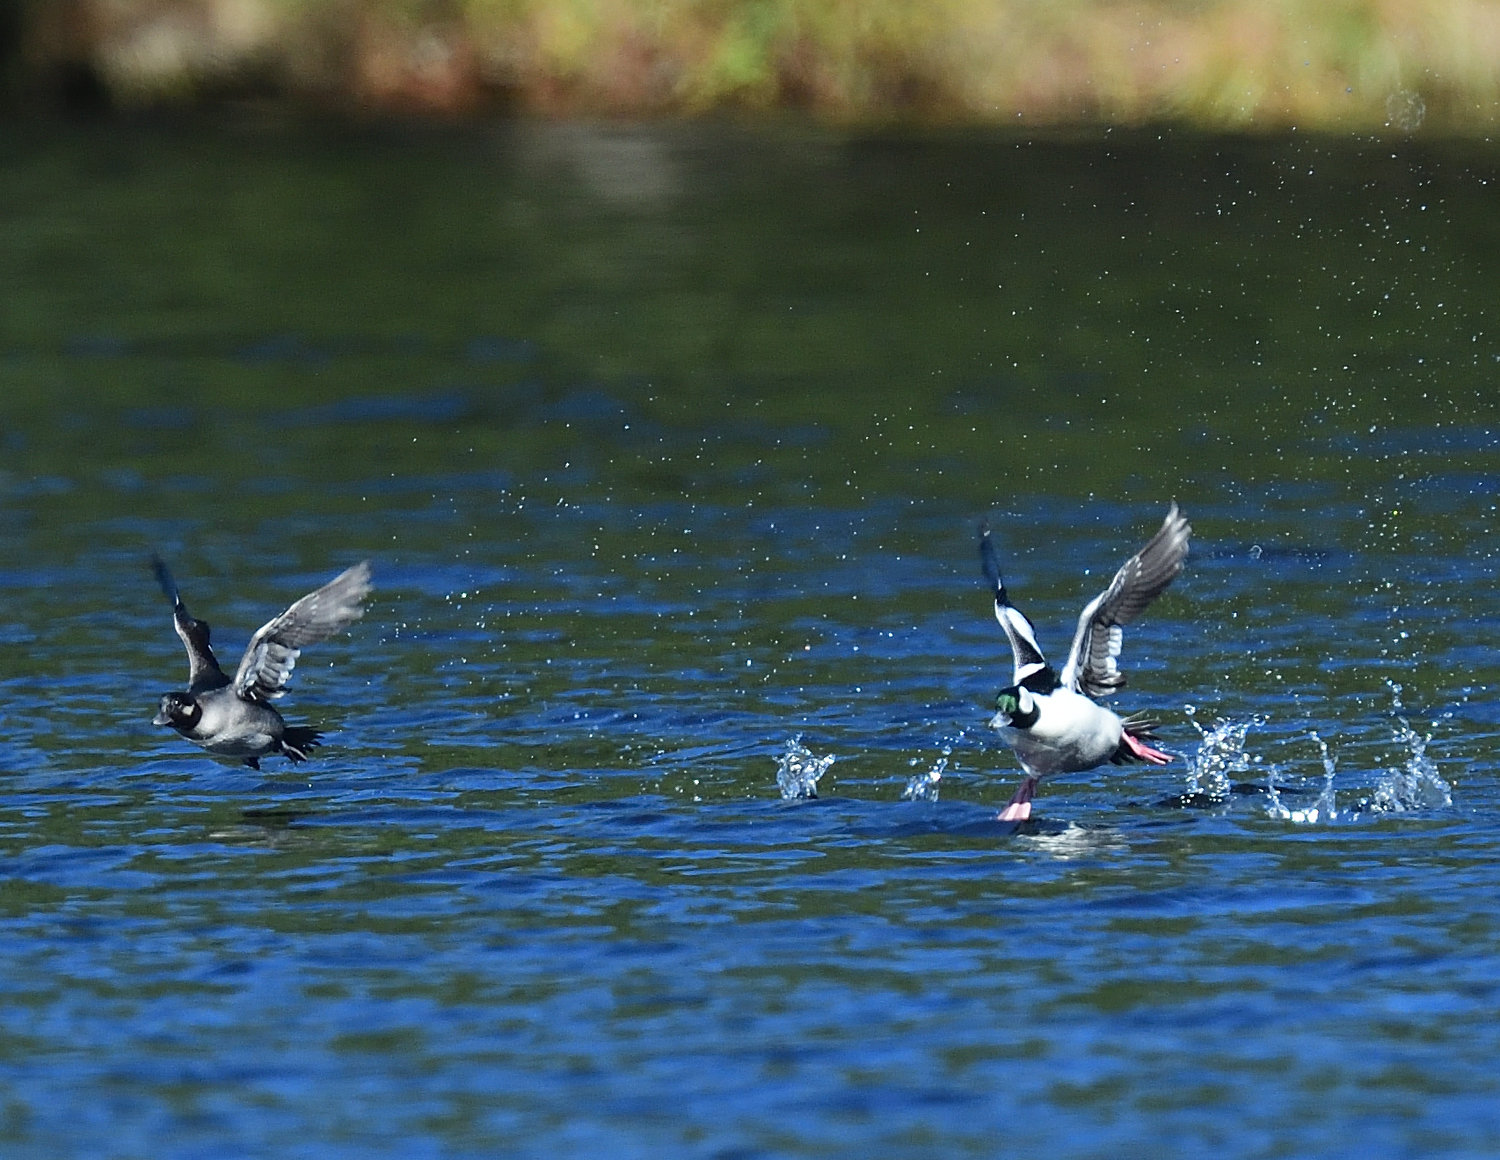 An approaching boat has caused the trio to take off. The male on the right is running on water, pushing himself forward as his wings also create a forward thrust and lift. The female to the left is already flying; you can see her “footprints” a few feet behind her, just to the left and behind the male.